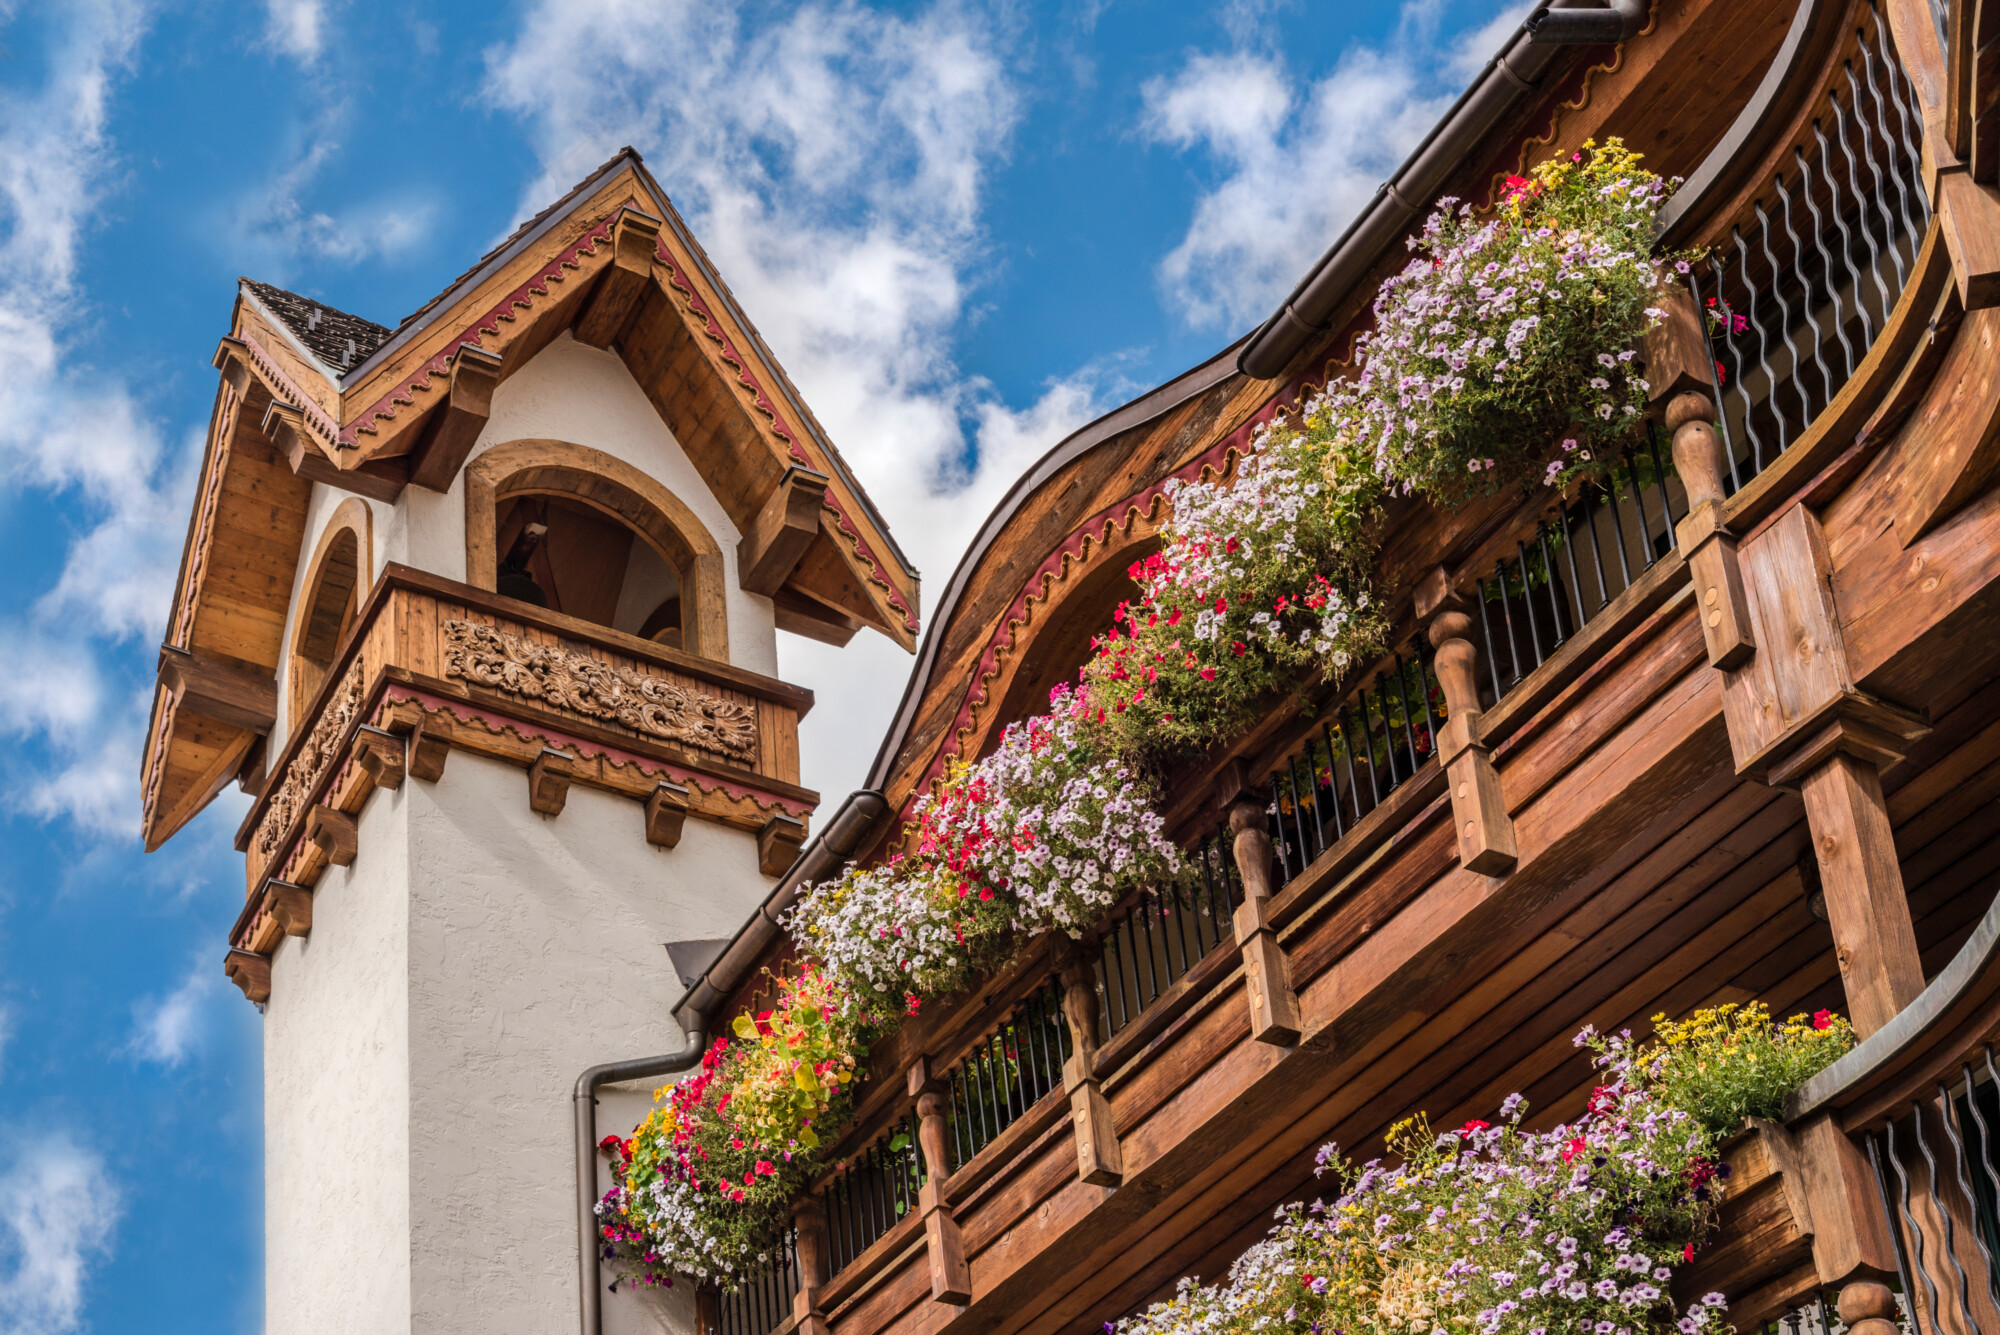 Bavarian building with colorful flowers